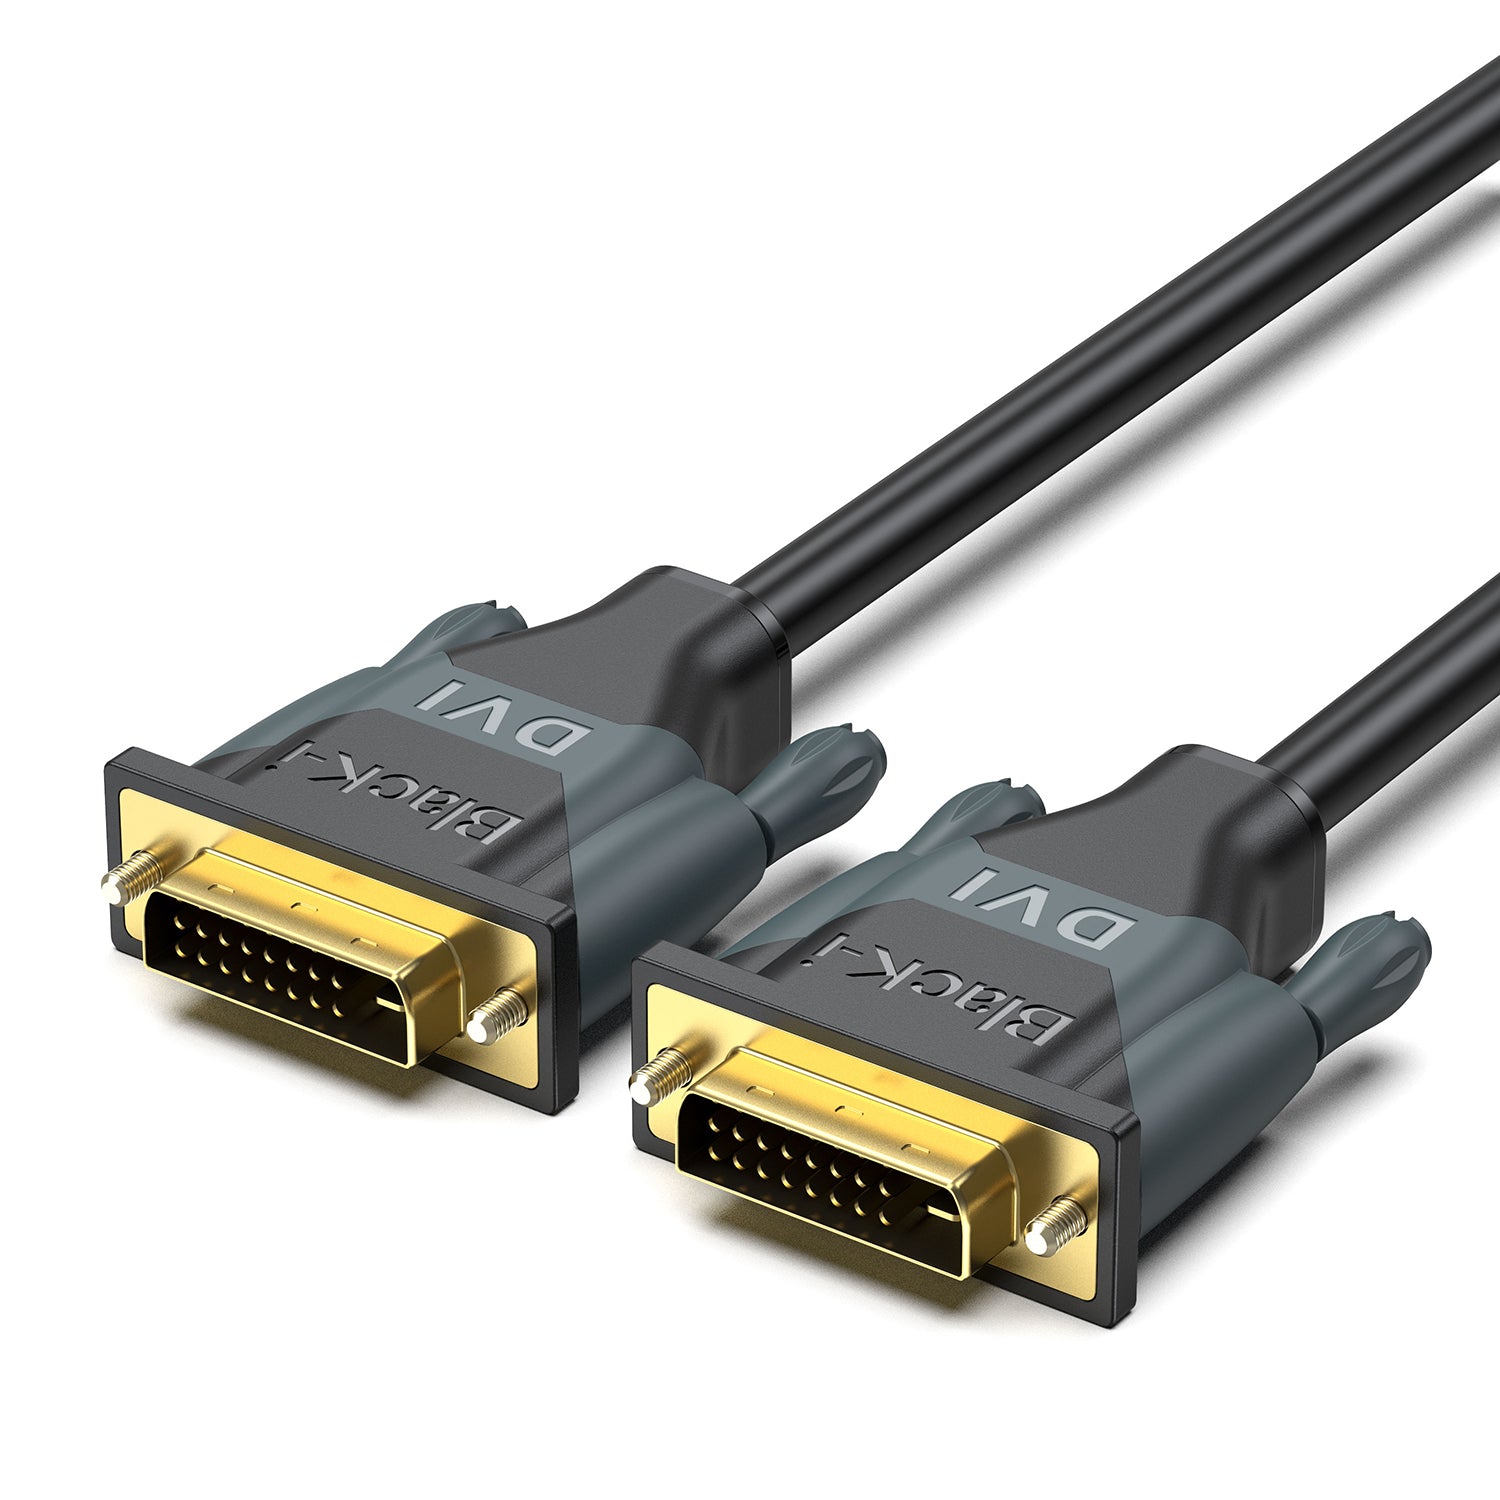 Black-i DVI-D Cable – Transmit Clear and Vibrant Digital Signals for Superior Display Performance